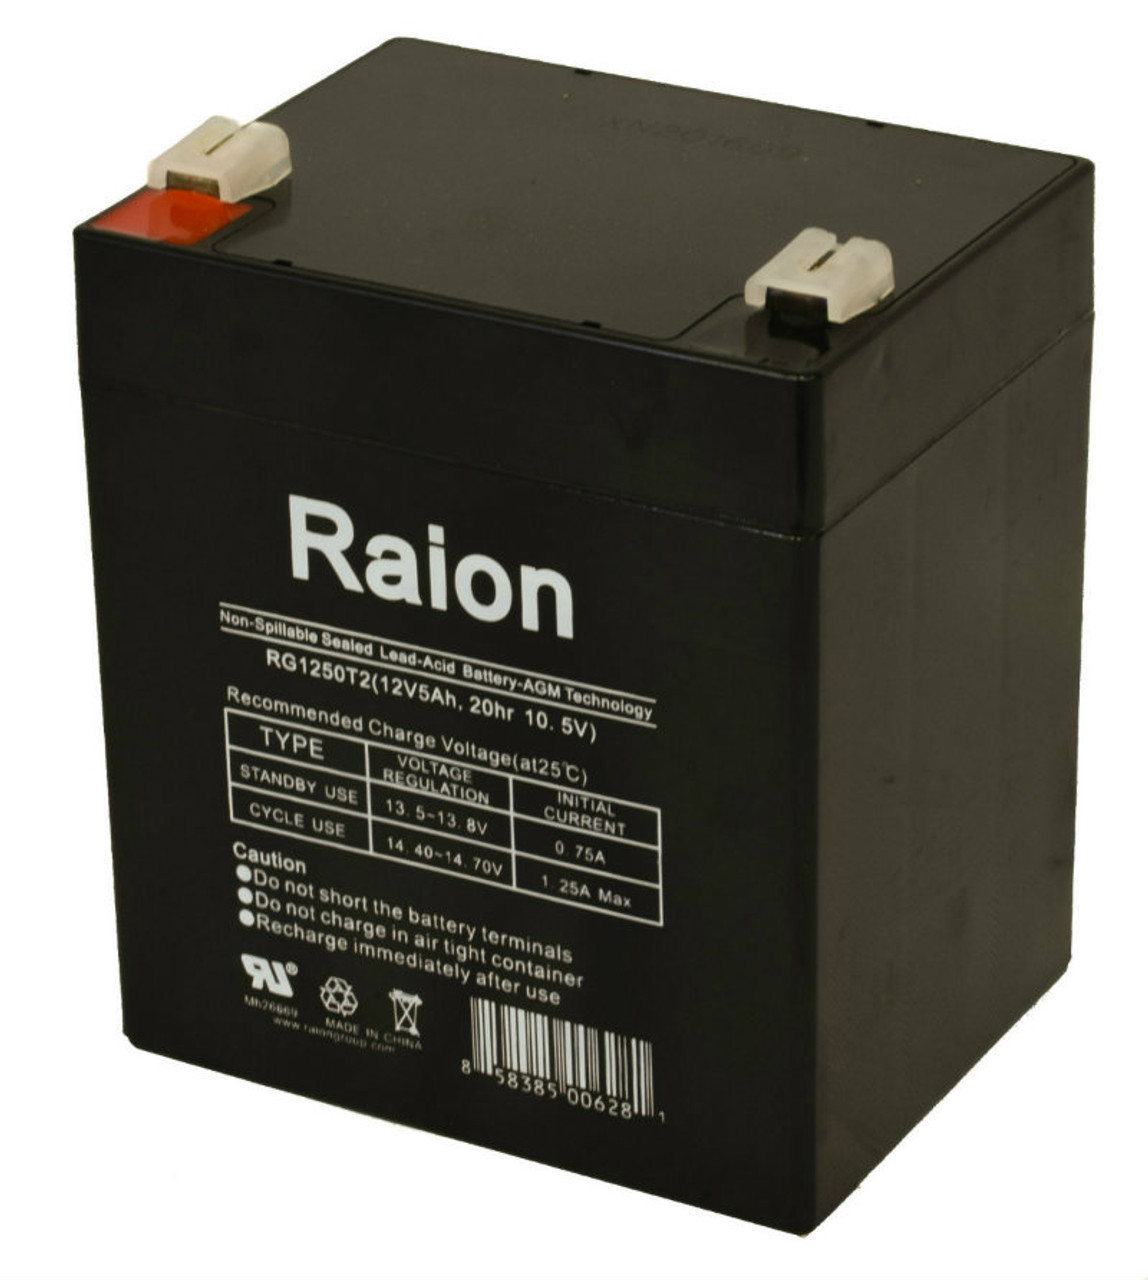 Raion Power RG1250T1 Replacement Battery for Newport Medical Instruments HT50 Ventilator